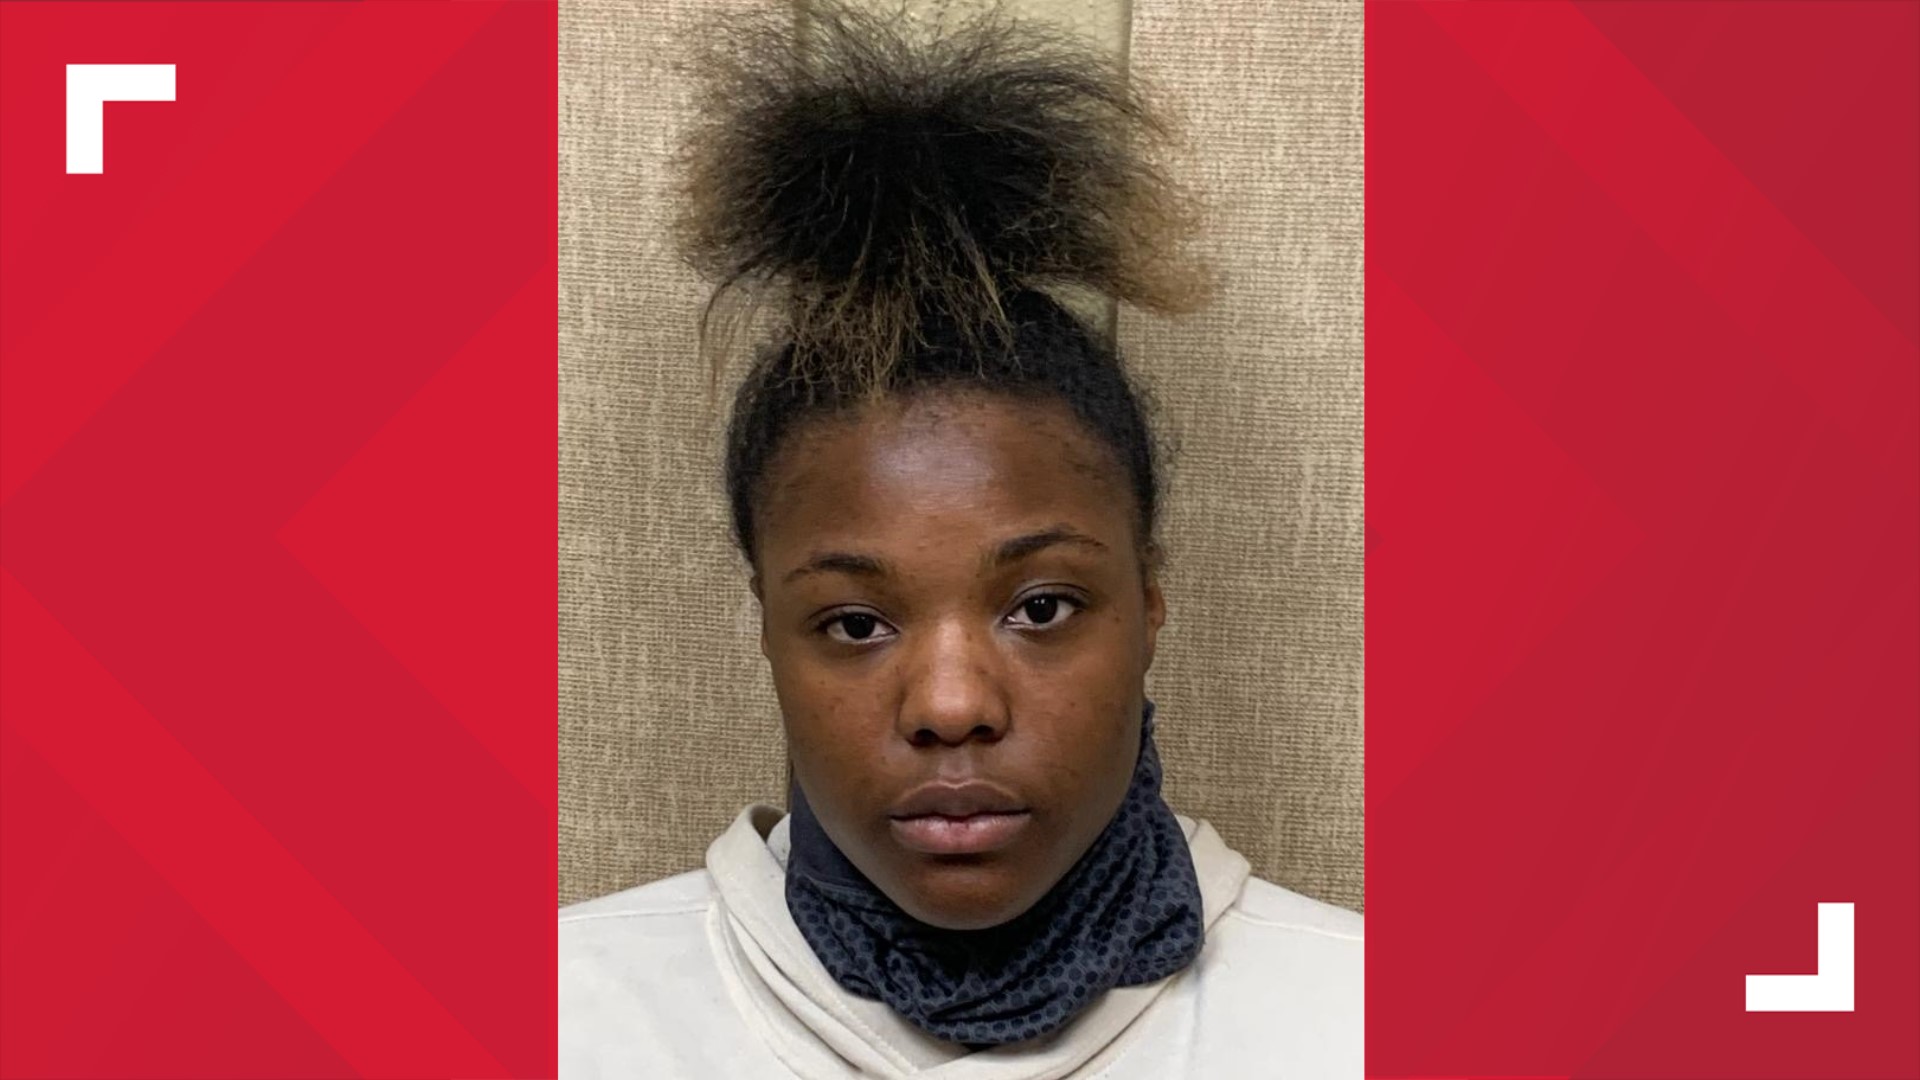 Mychelle Kshone Cole, 24, was originally charged with first-degree murder in the death of Isaiah Brandon Wagner, 31, of Beaumont.